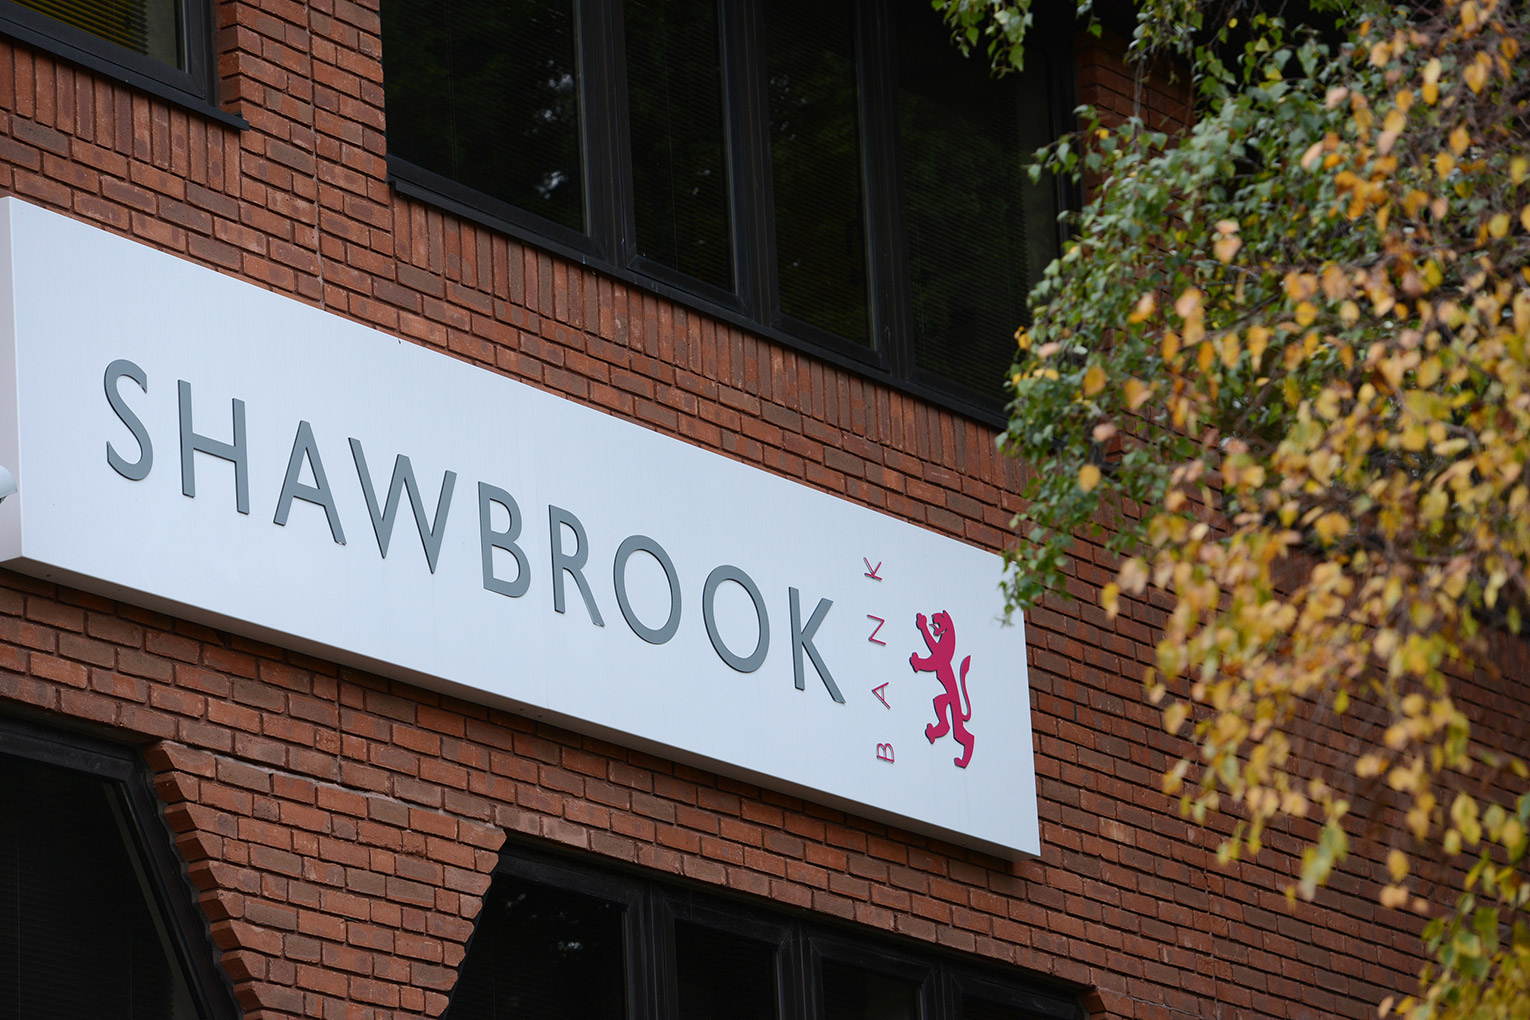 Shawbrook reaches record new lending levels